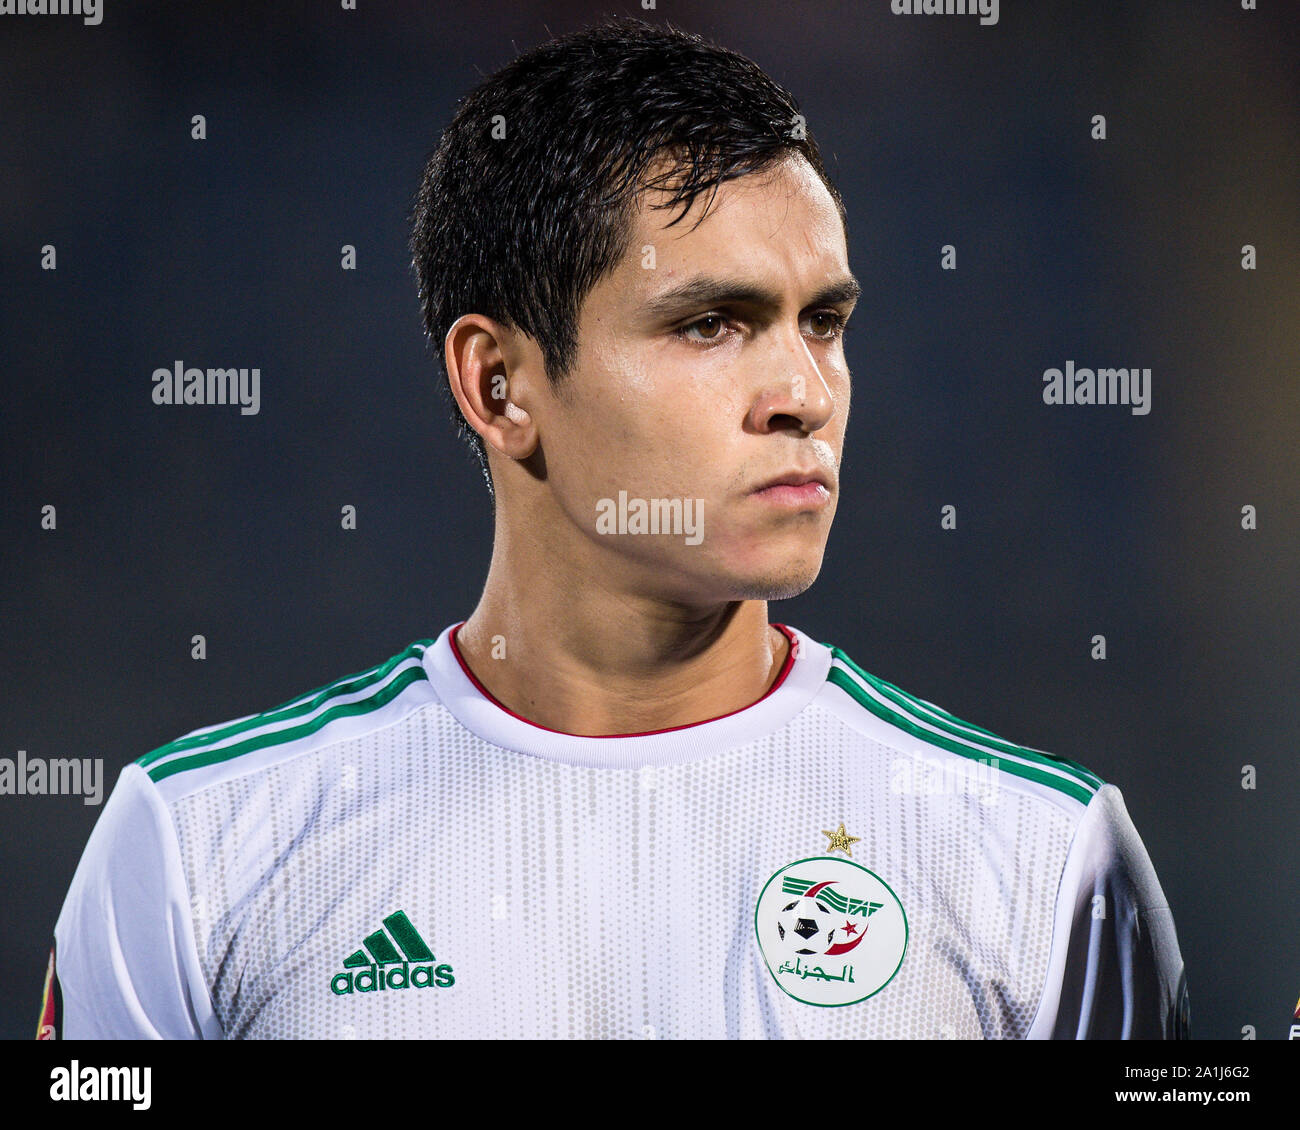 CAIRO, EGYPT - JUNE 23: Aissa Mandi of Algeria looks on during the 2019 Africa Cup of Nations Group C match between Algeria and Kenya at 30 June Stadi Stock Photo